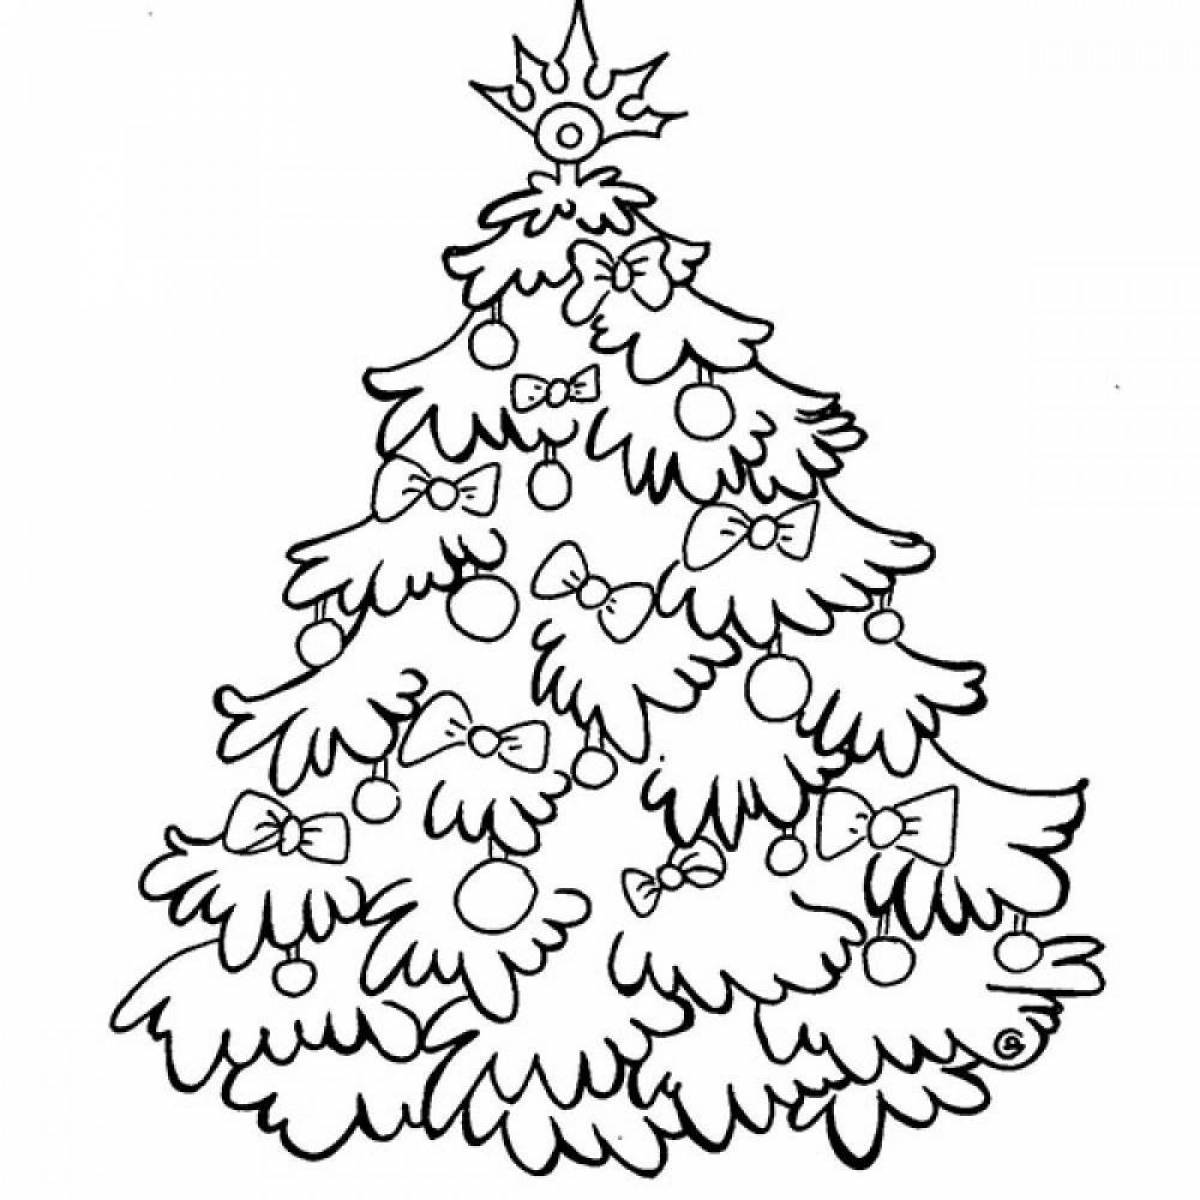 Coloring book joyful Christmas tree for children 3-4 years old